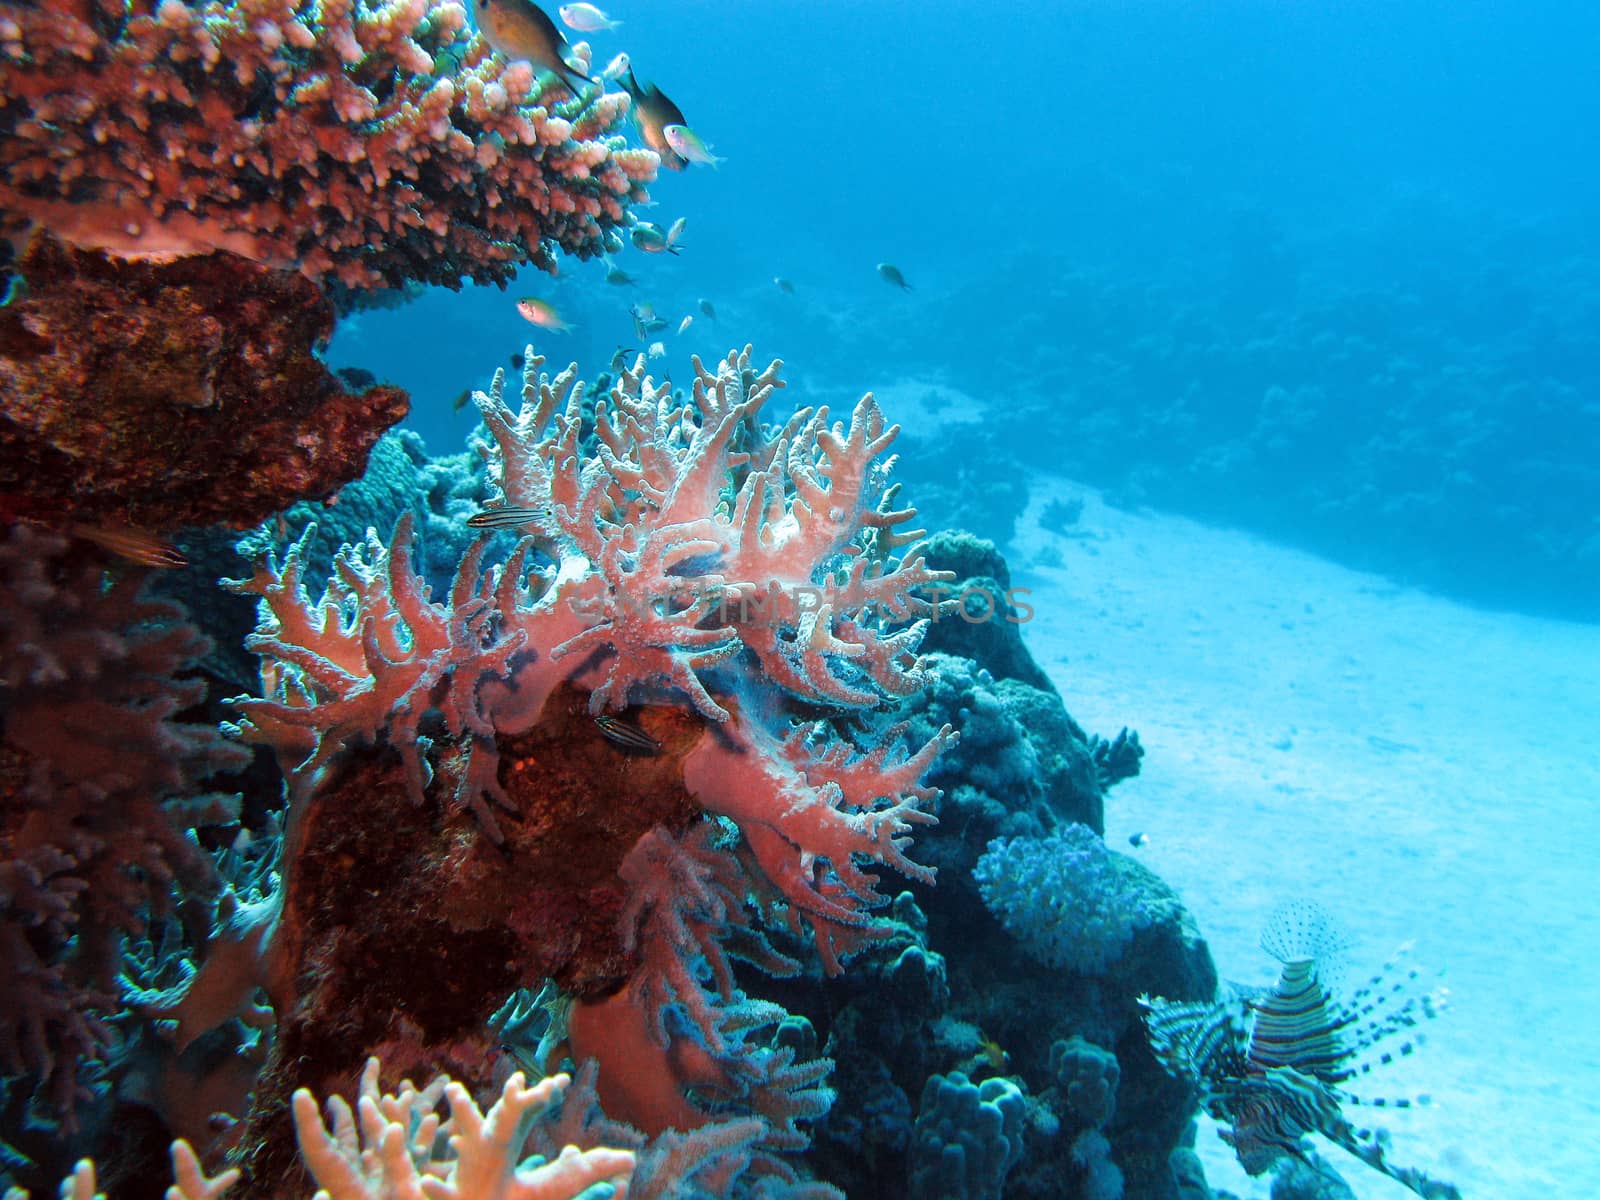 coral reef with hard corals at the bottom of tropical sea